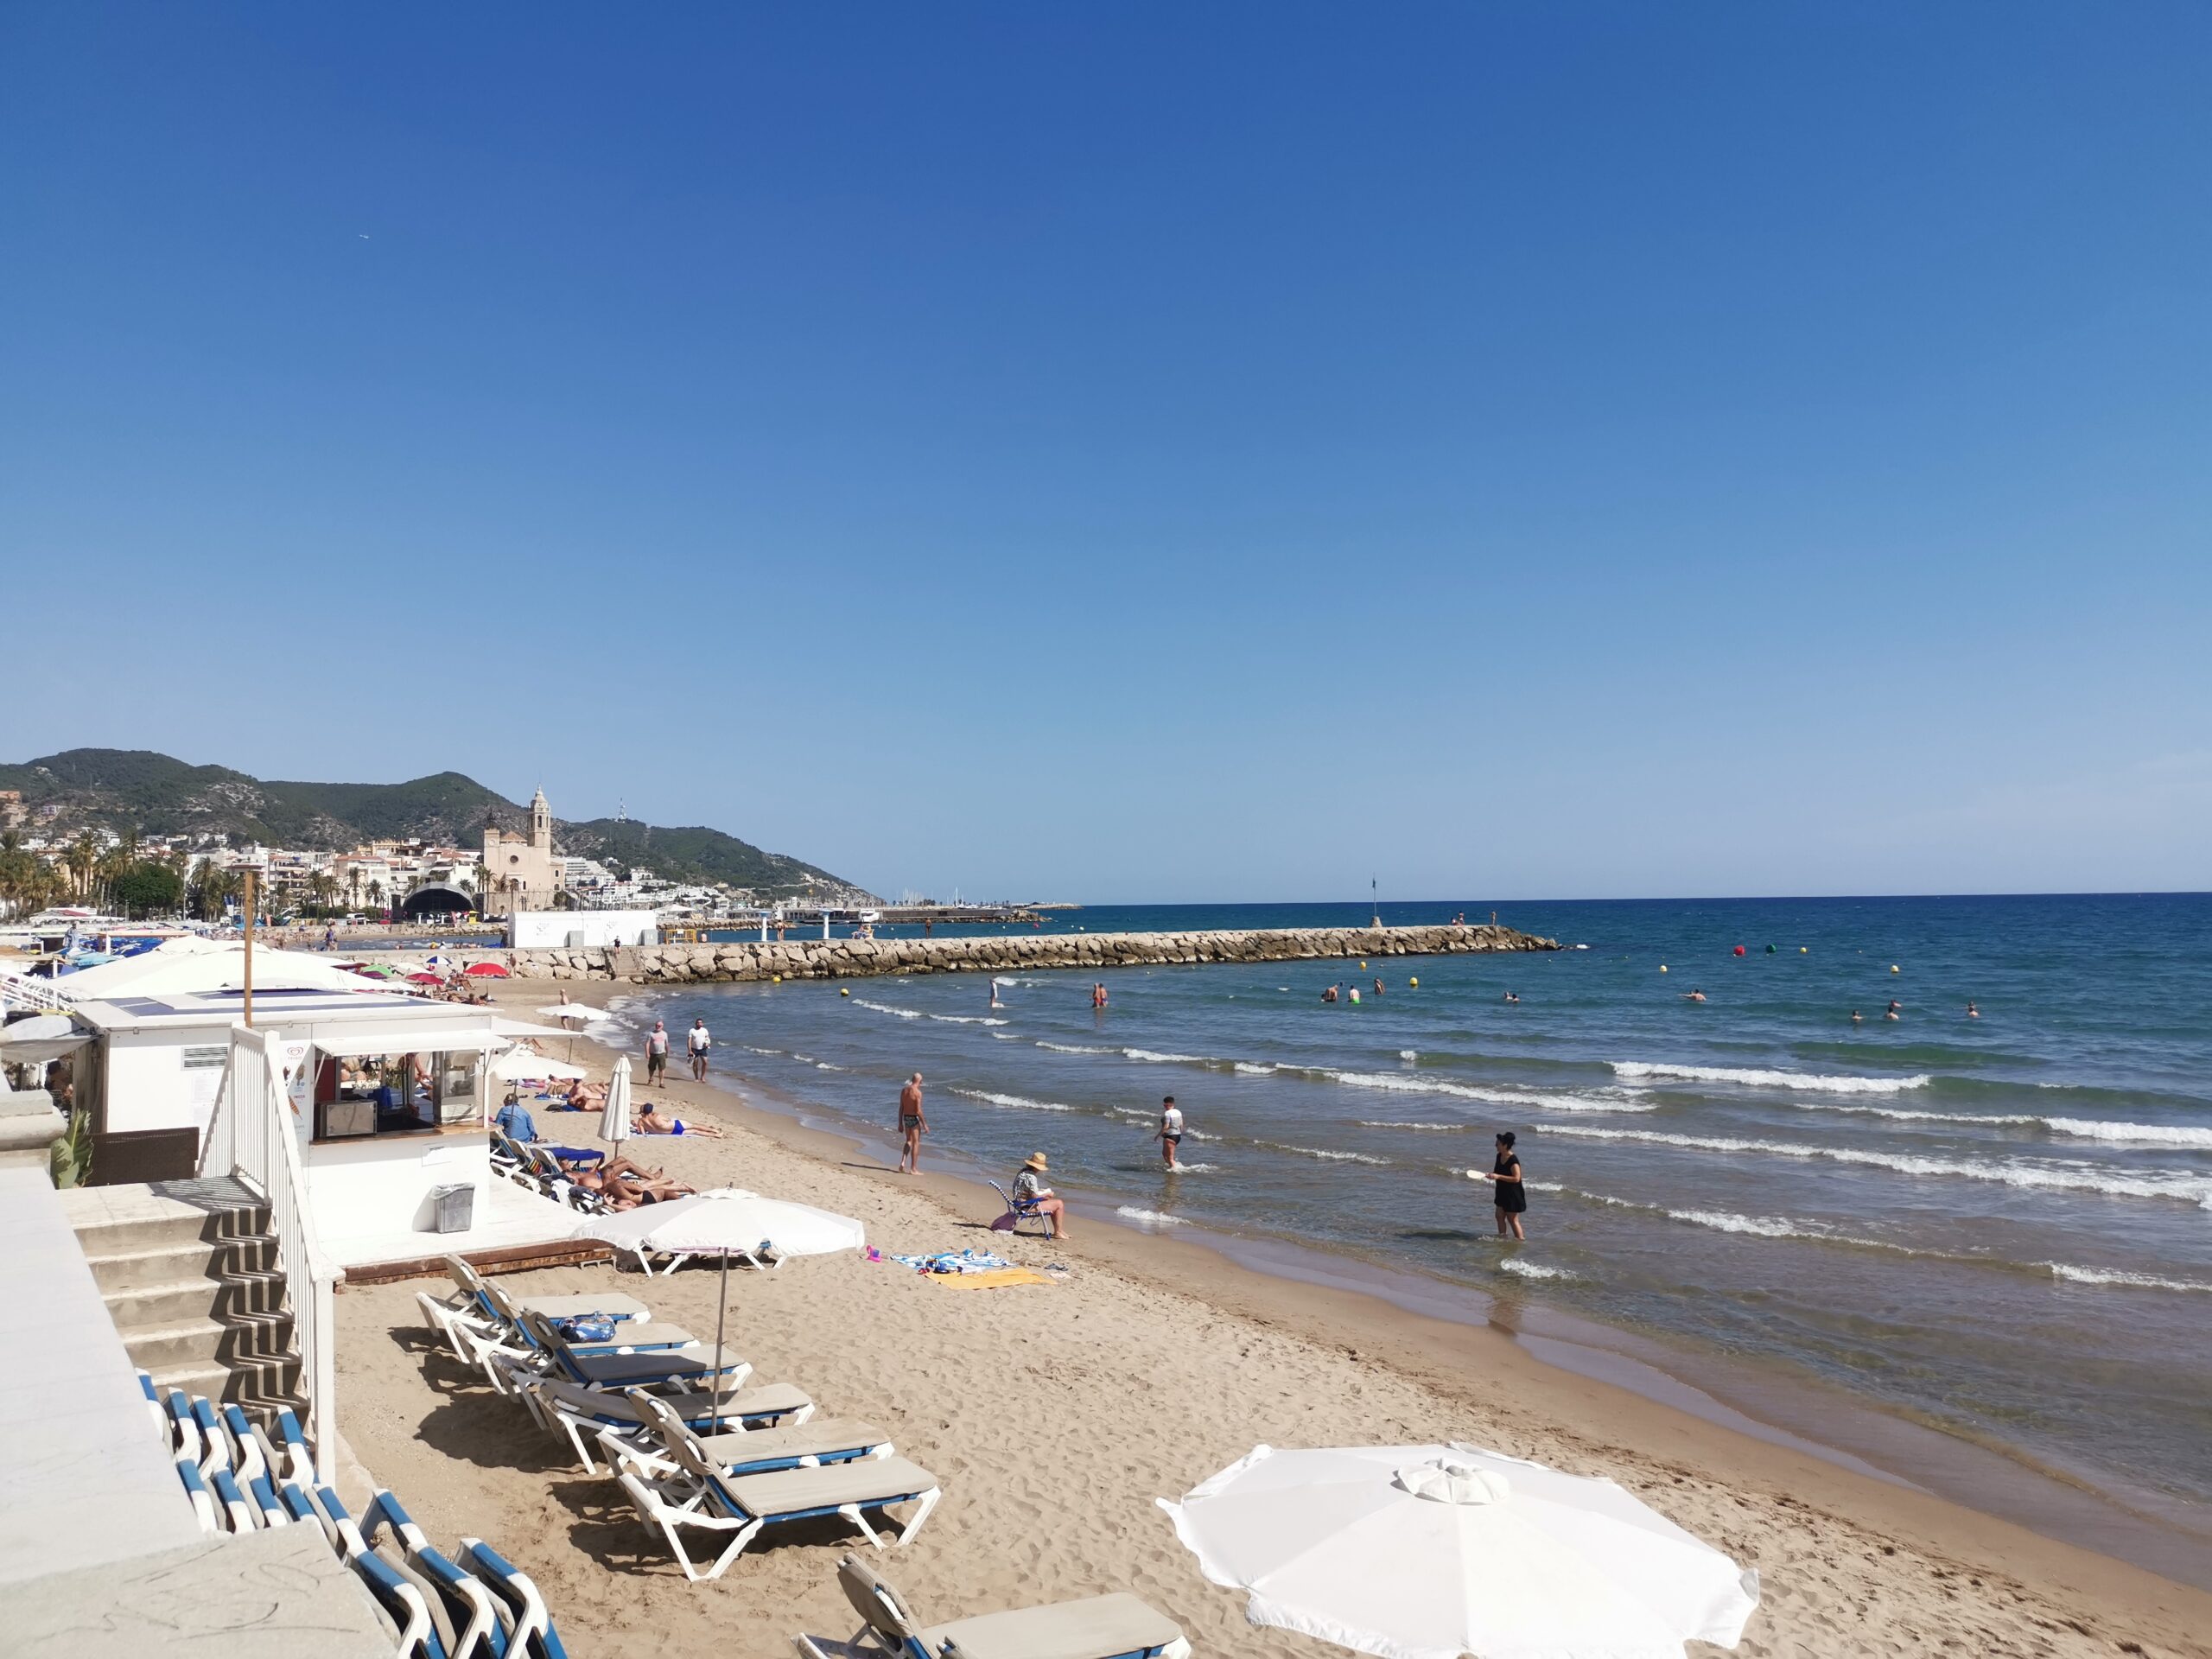 Sitges is a stunning coastal town just 26 miles from Barcelona